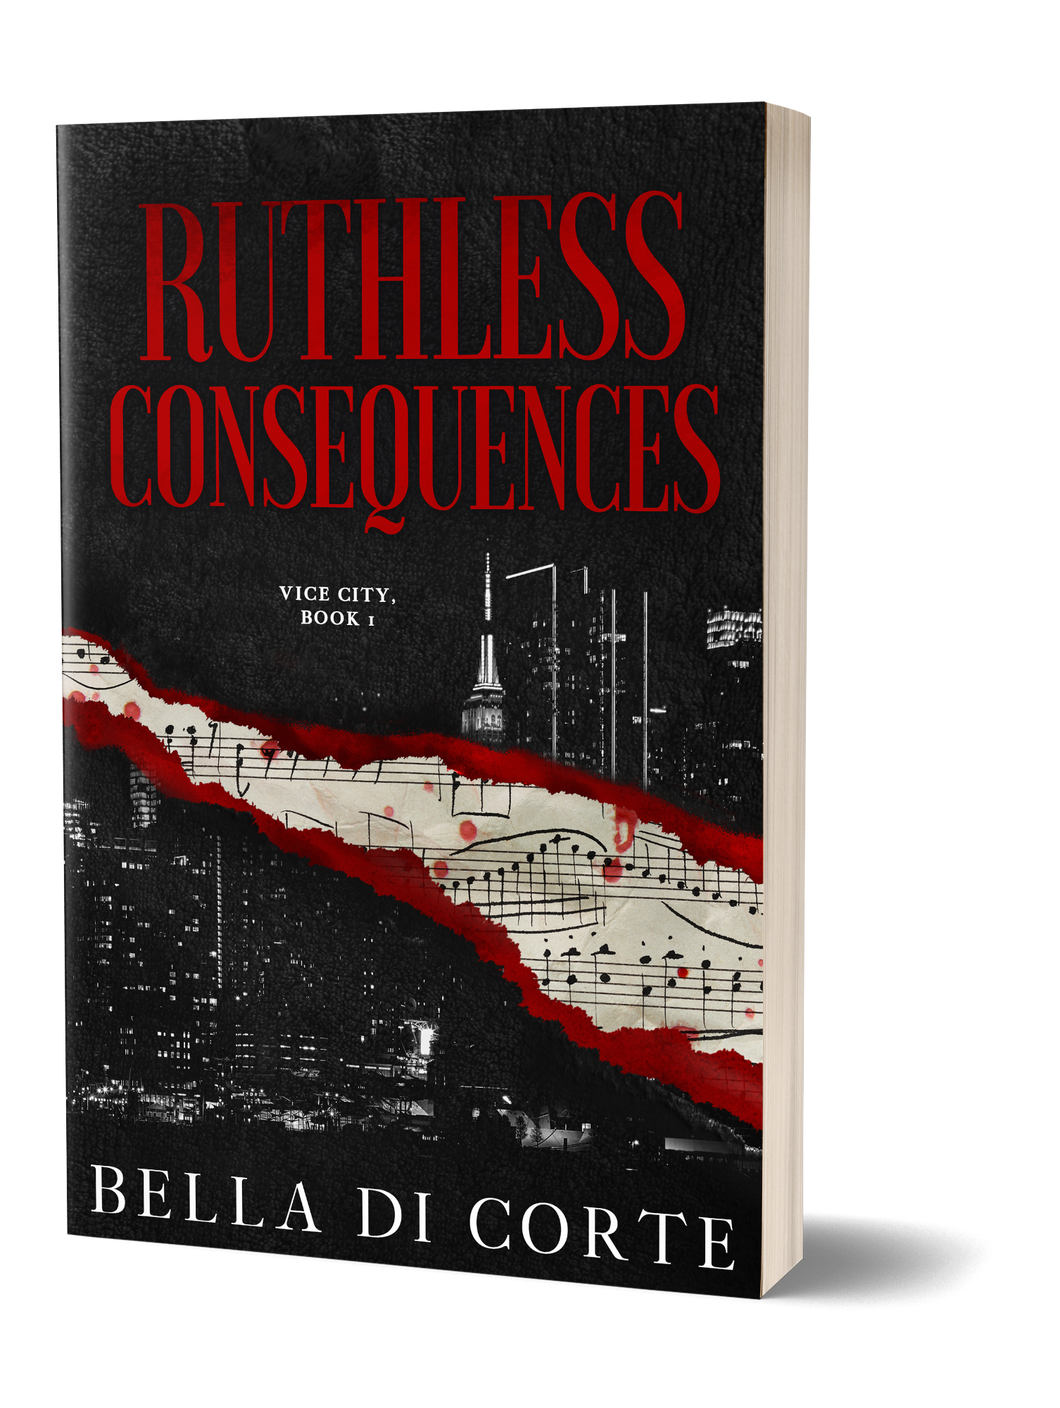 Ruthless Consequences (Vice City, Book 1, MAIN COVER)